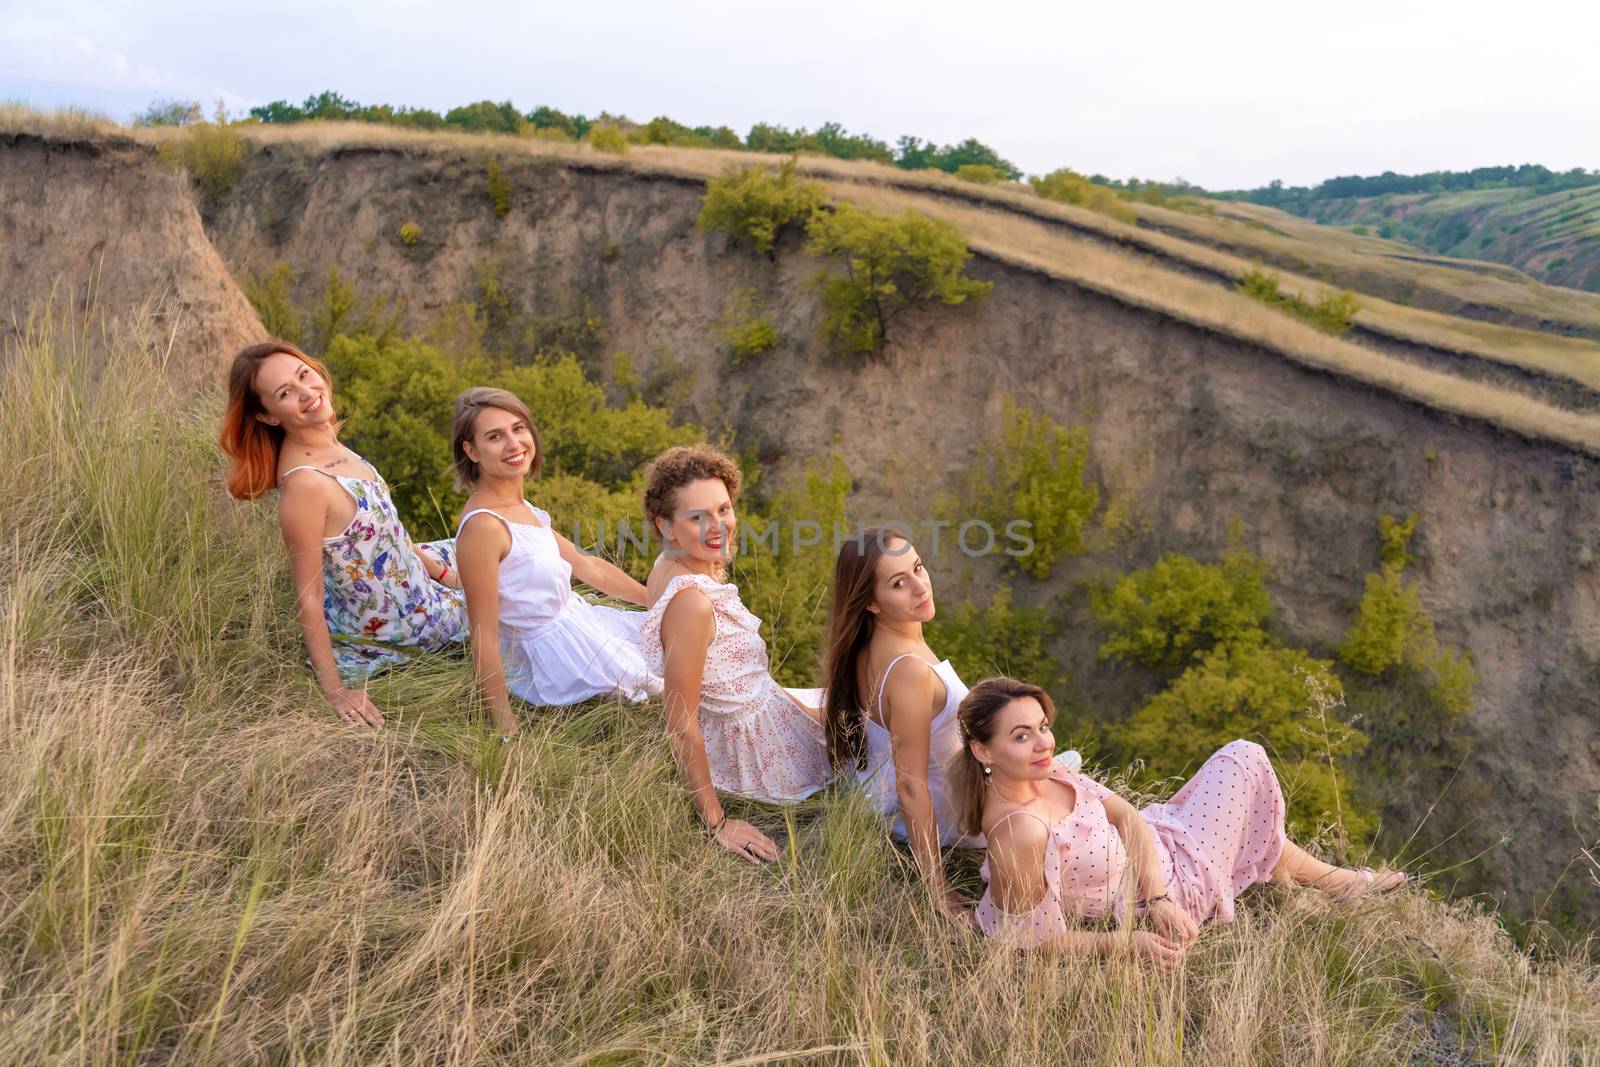 A cheerful company of beautiful girls friends enjoy a picturesque panorama of the green hills at sunset.